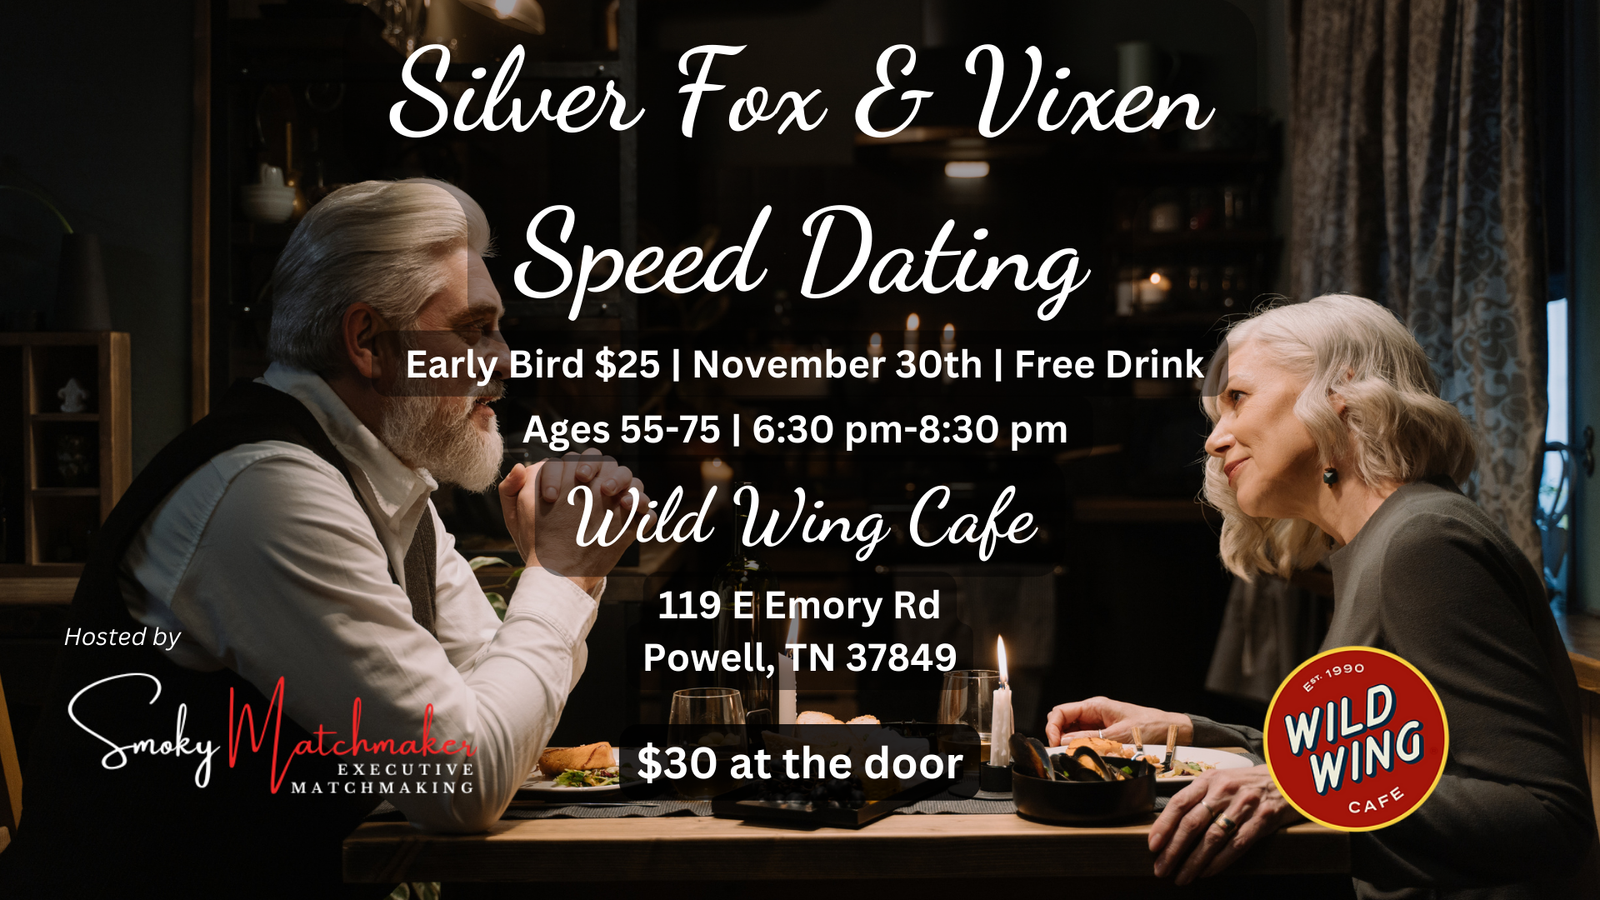 Silver Fox And Vixen Speed Dating Party in November!